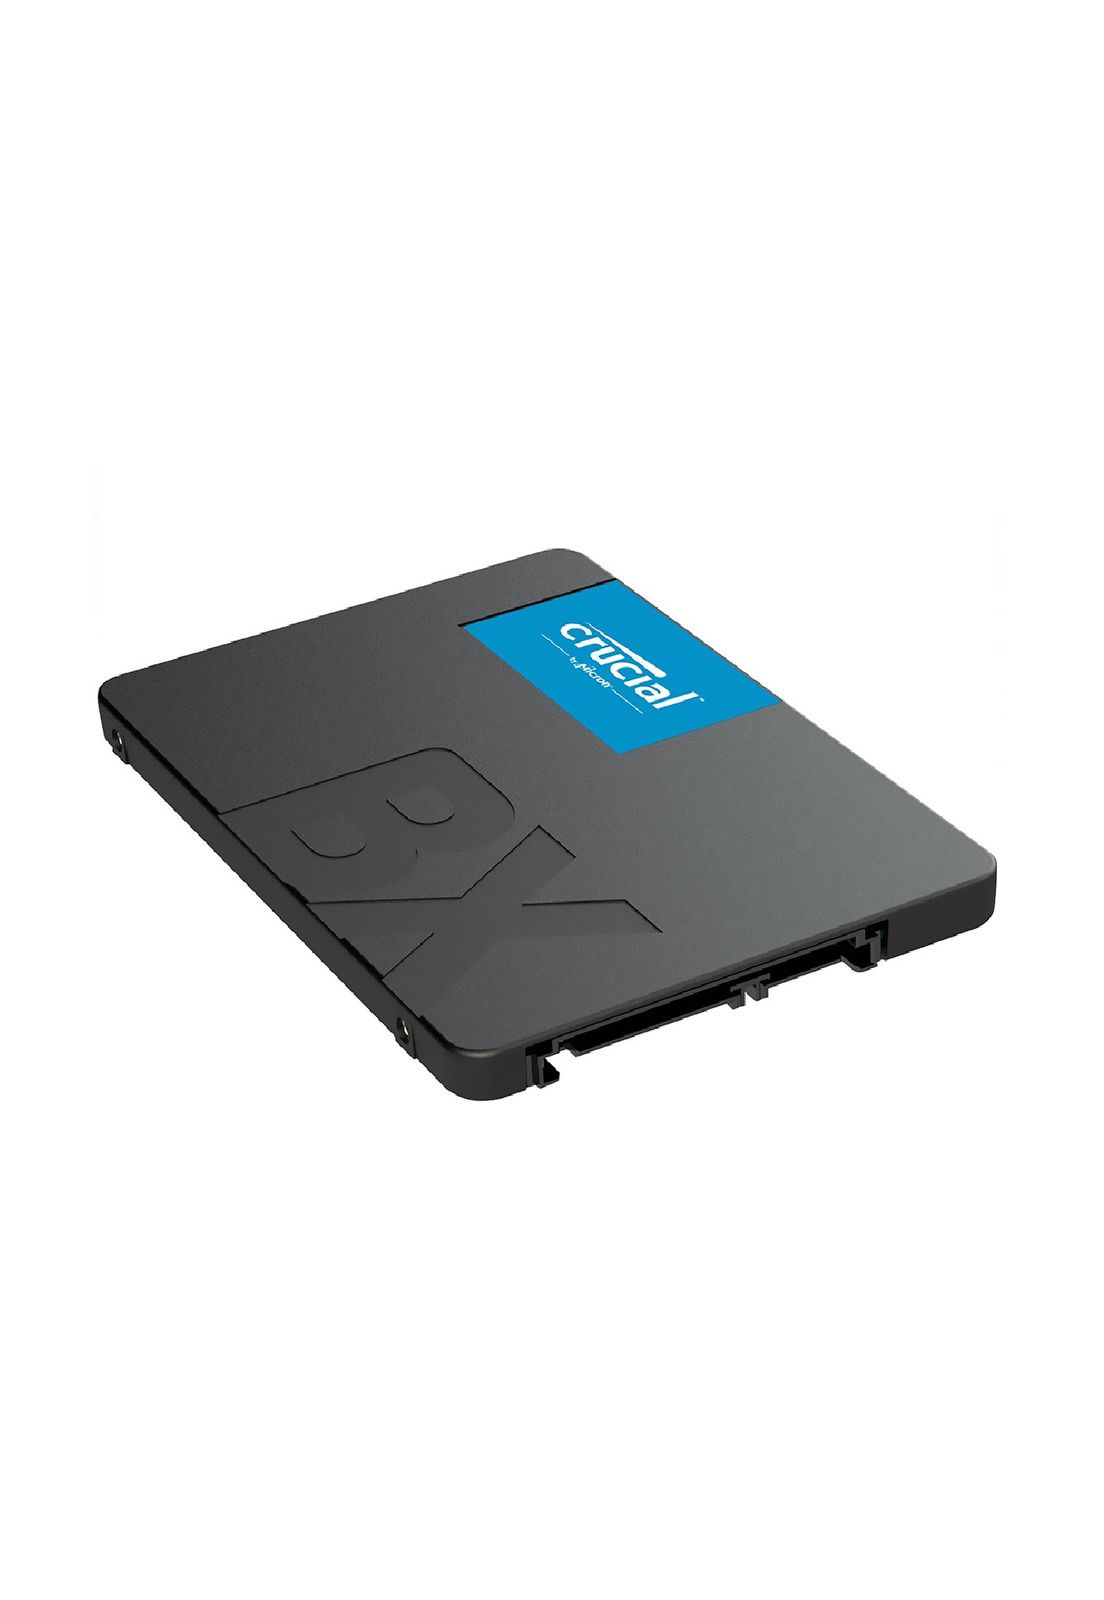 Disco Solido SSD Crucial BX500 500GB 3D NAND